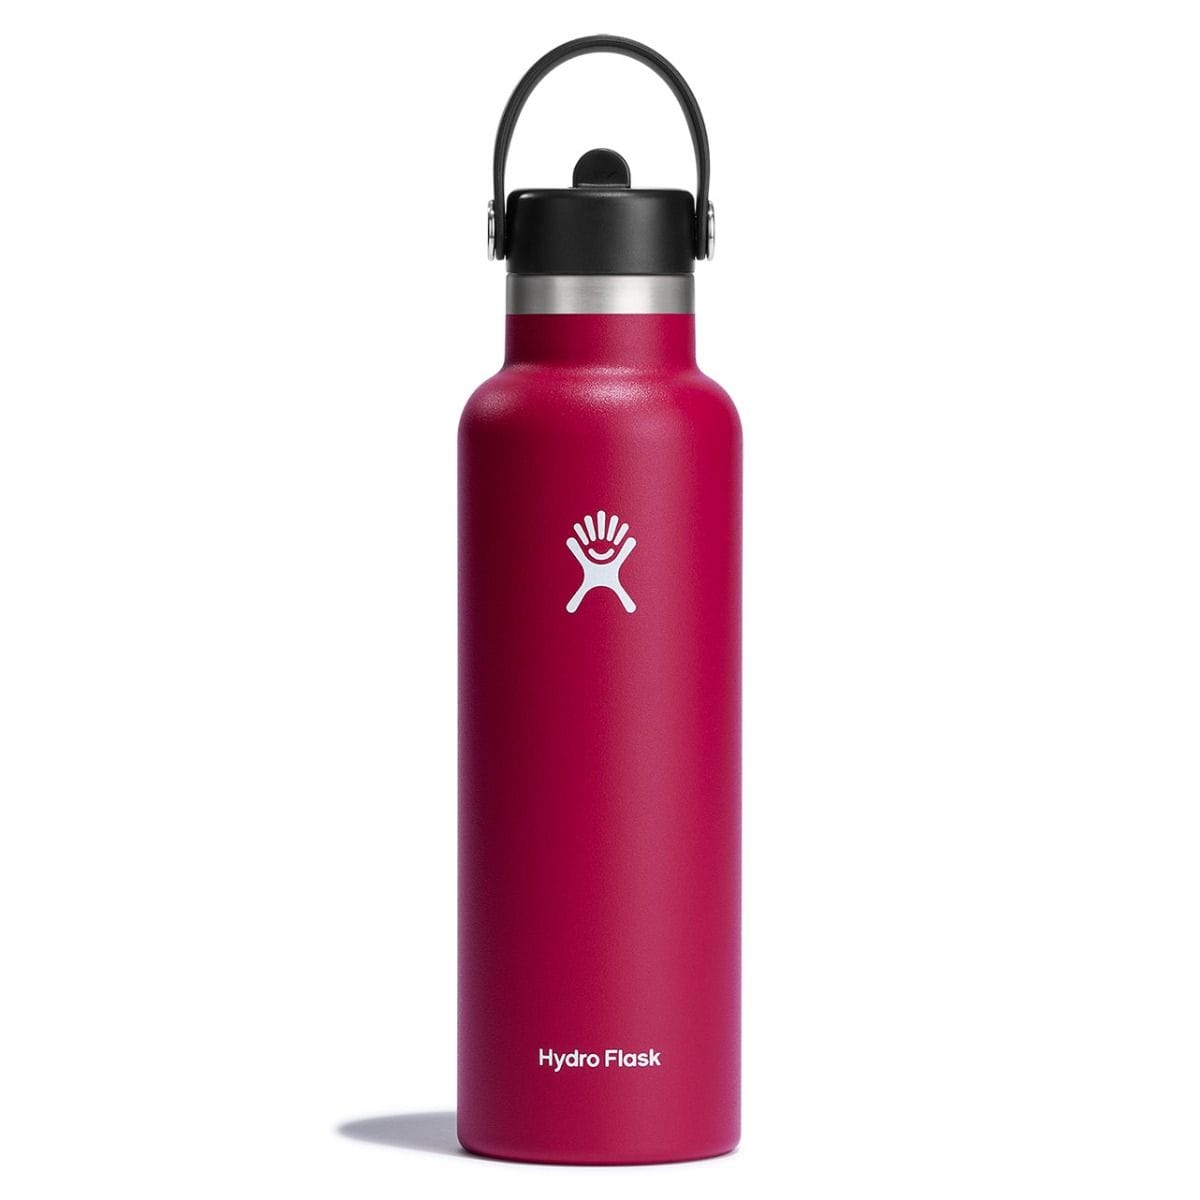 Hydro Flask Bottles & Flasks Snapper Hydro Flask Standard Mouth with Flex Straw Cap